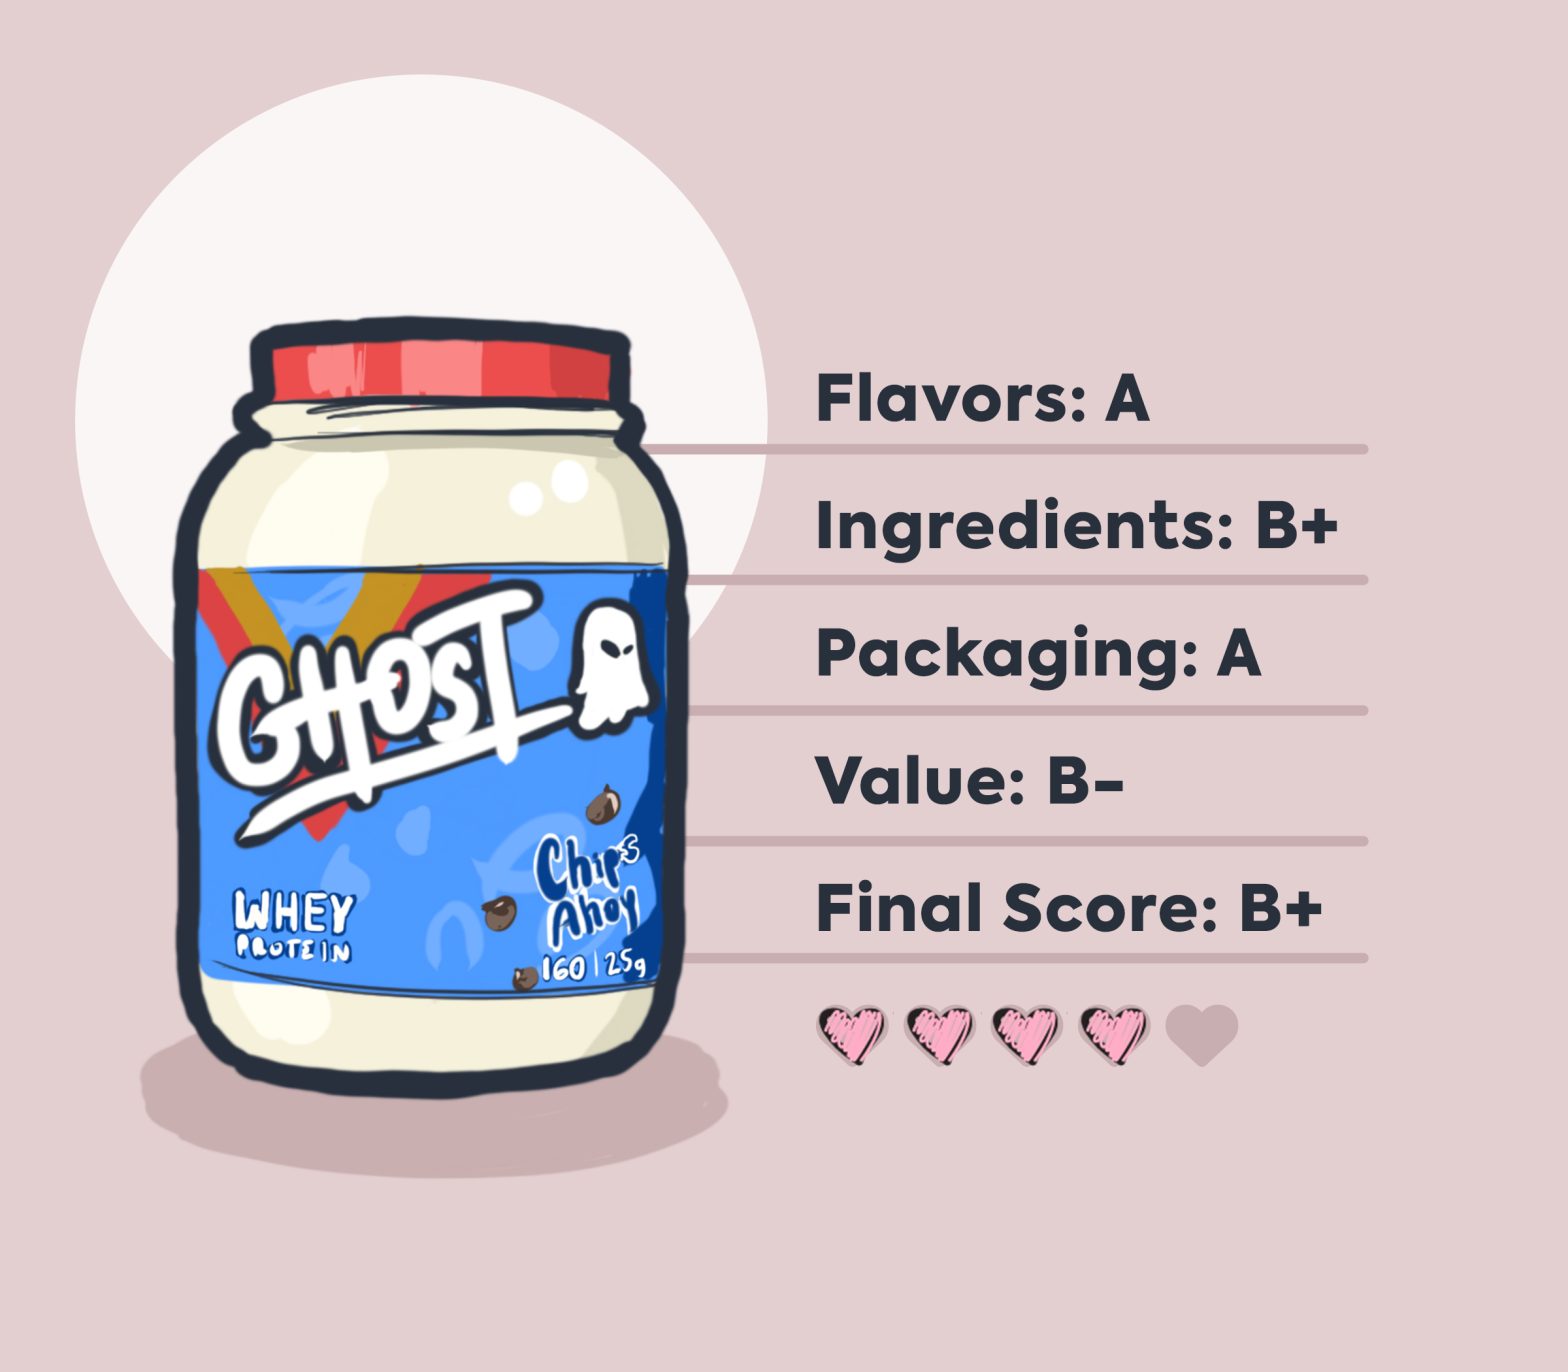 ghost whey illustration with packaging featured on pink background with review score data